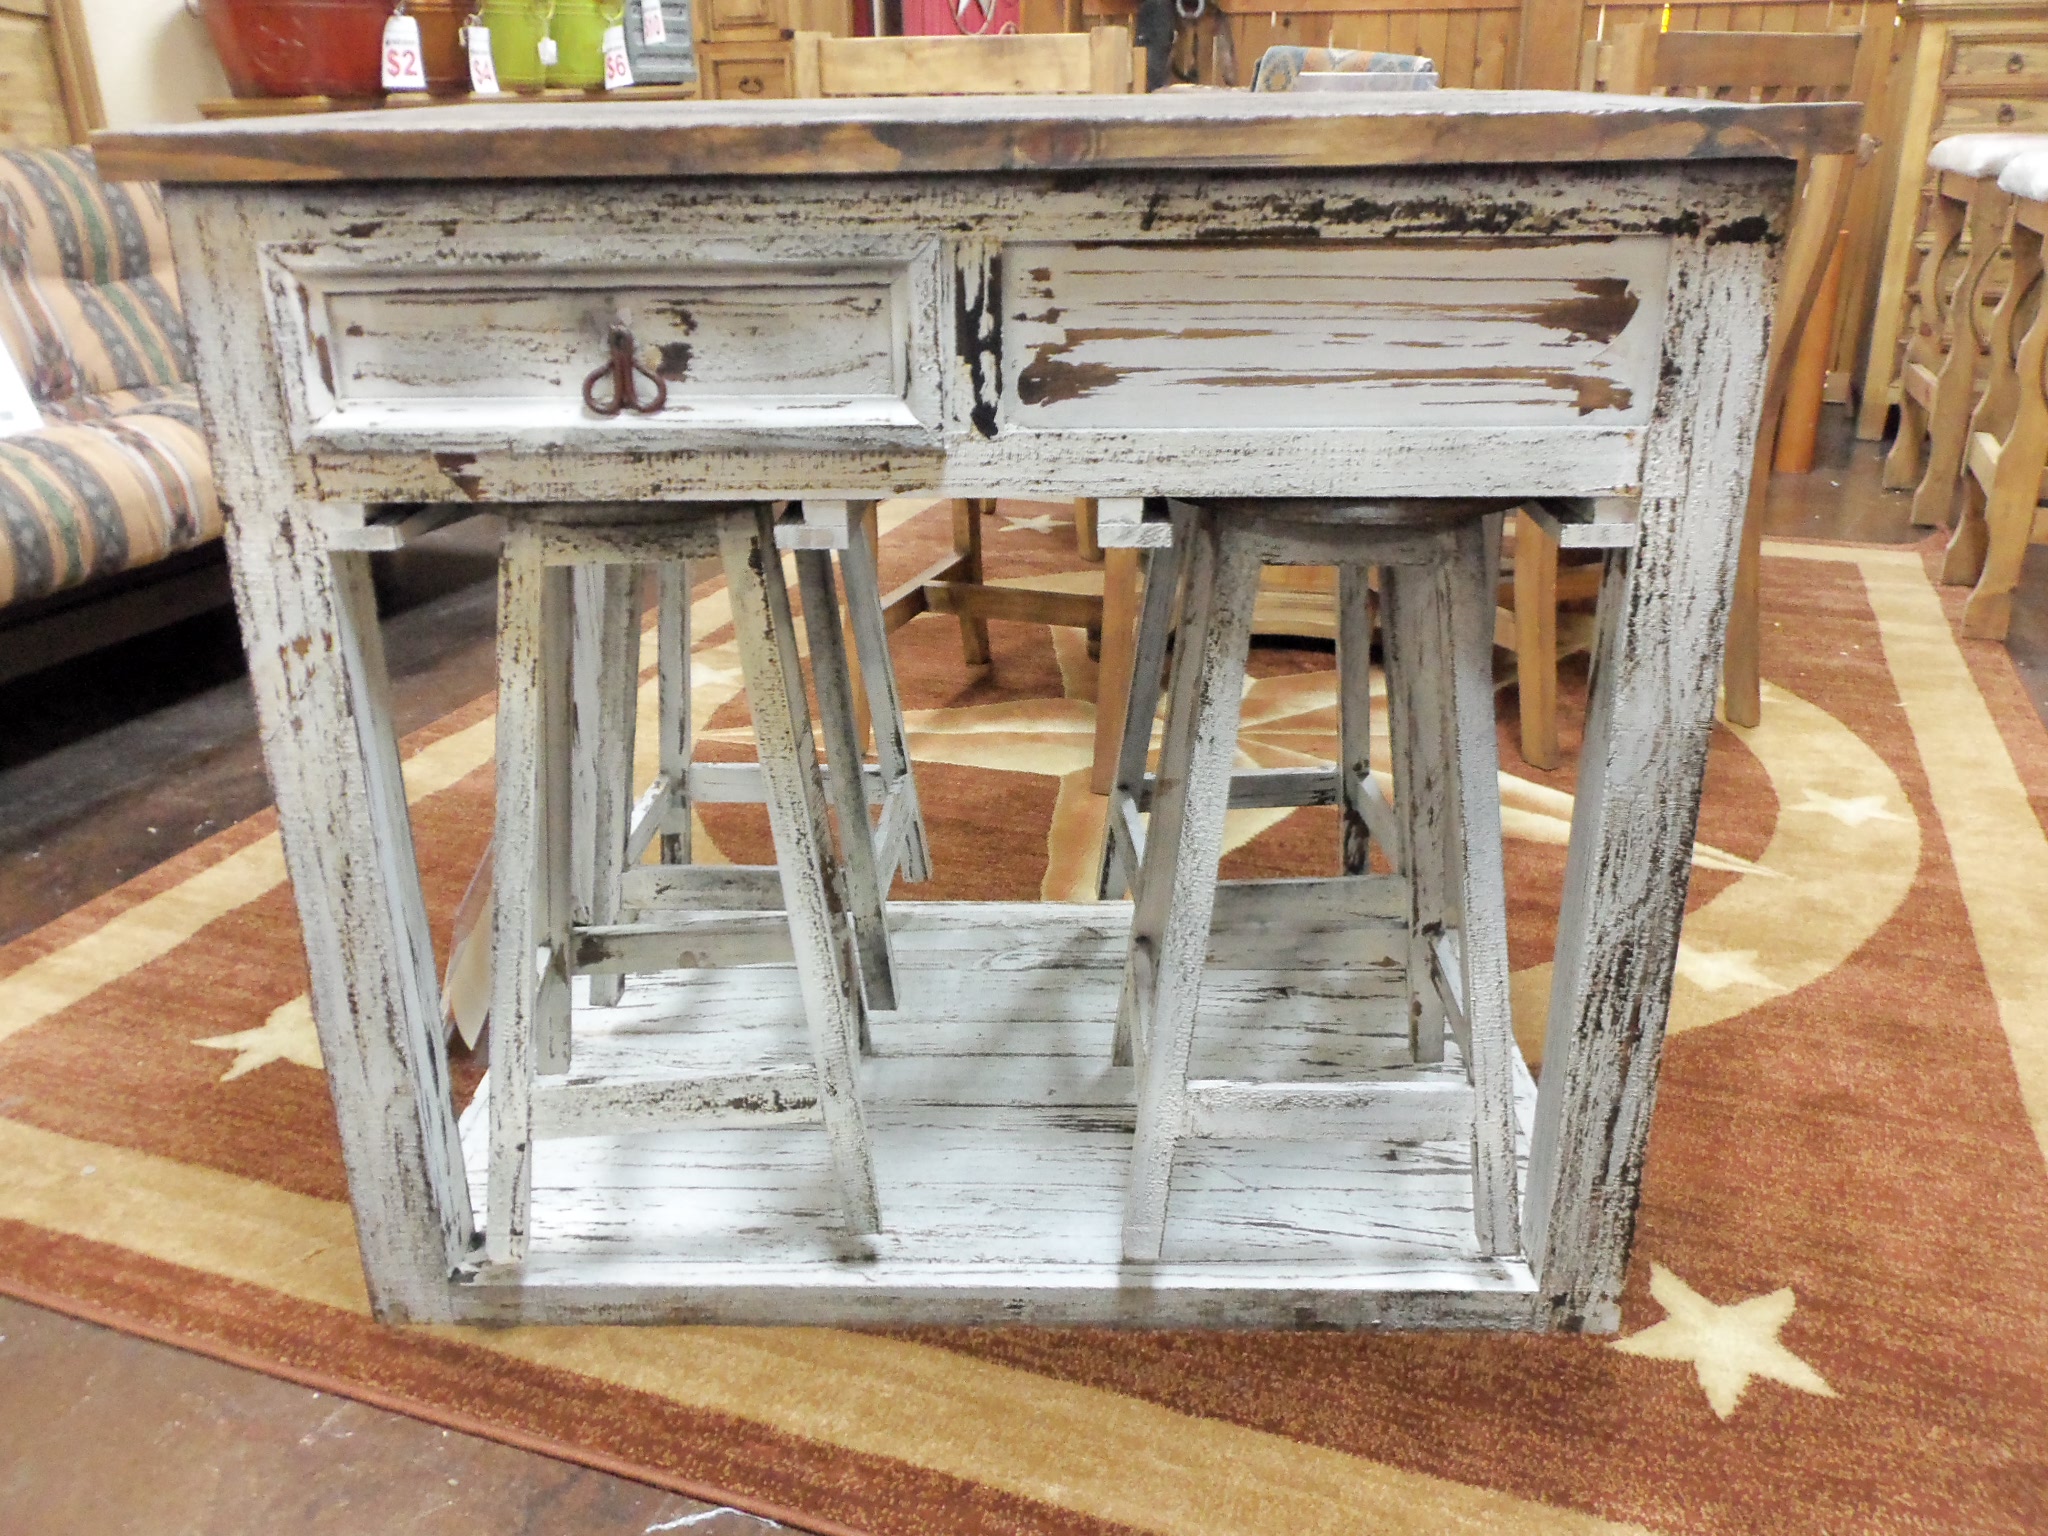 Farmhouse Kitchen Island With Stools, How Big Of An Island For 4 Stools